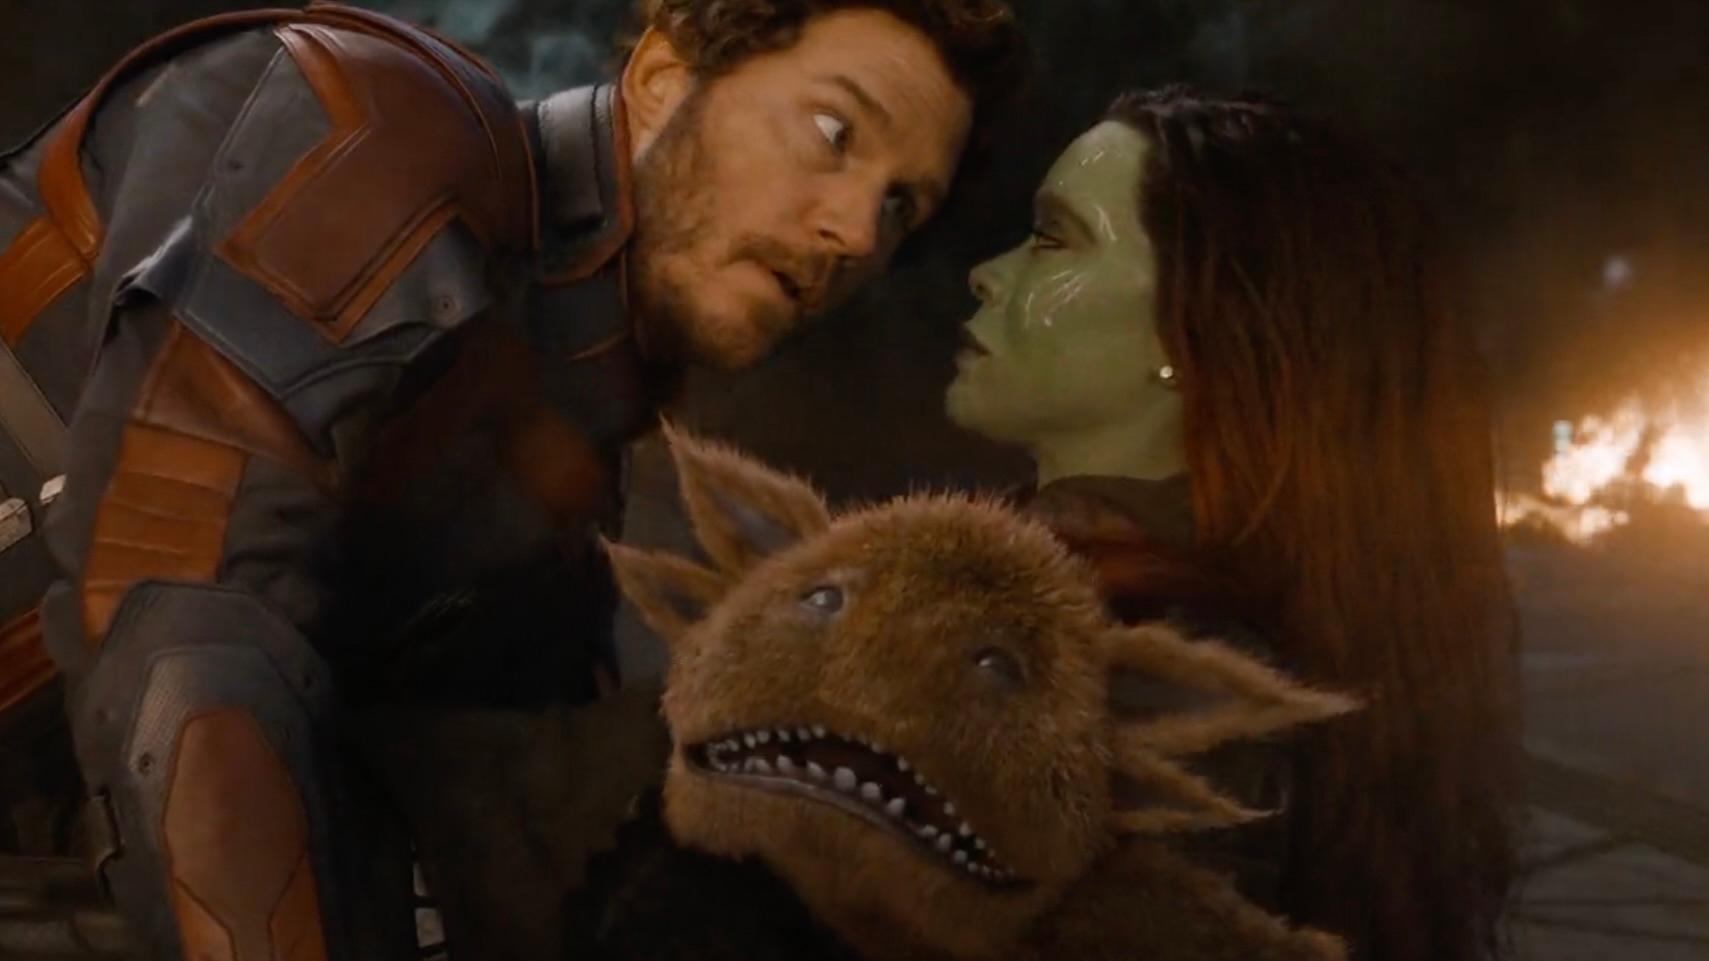 Peter Quill, Gamora, and Blurp.